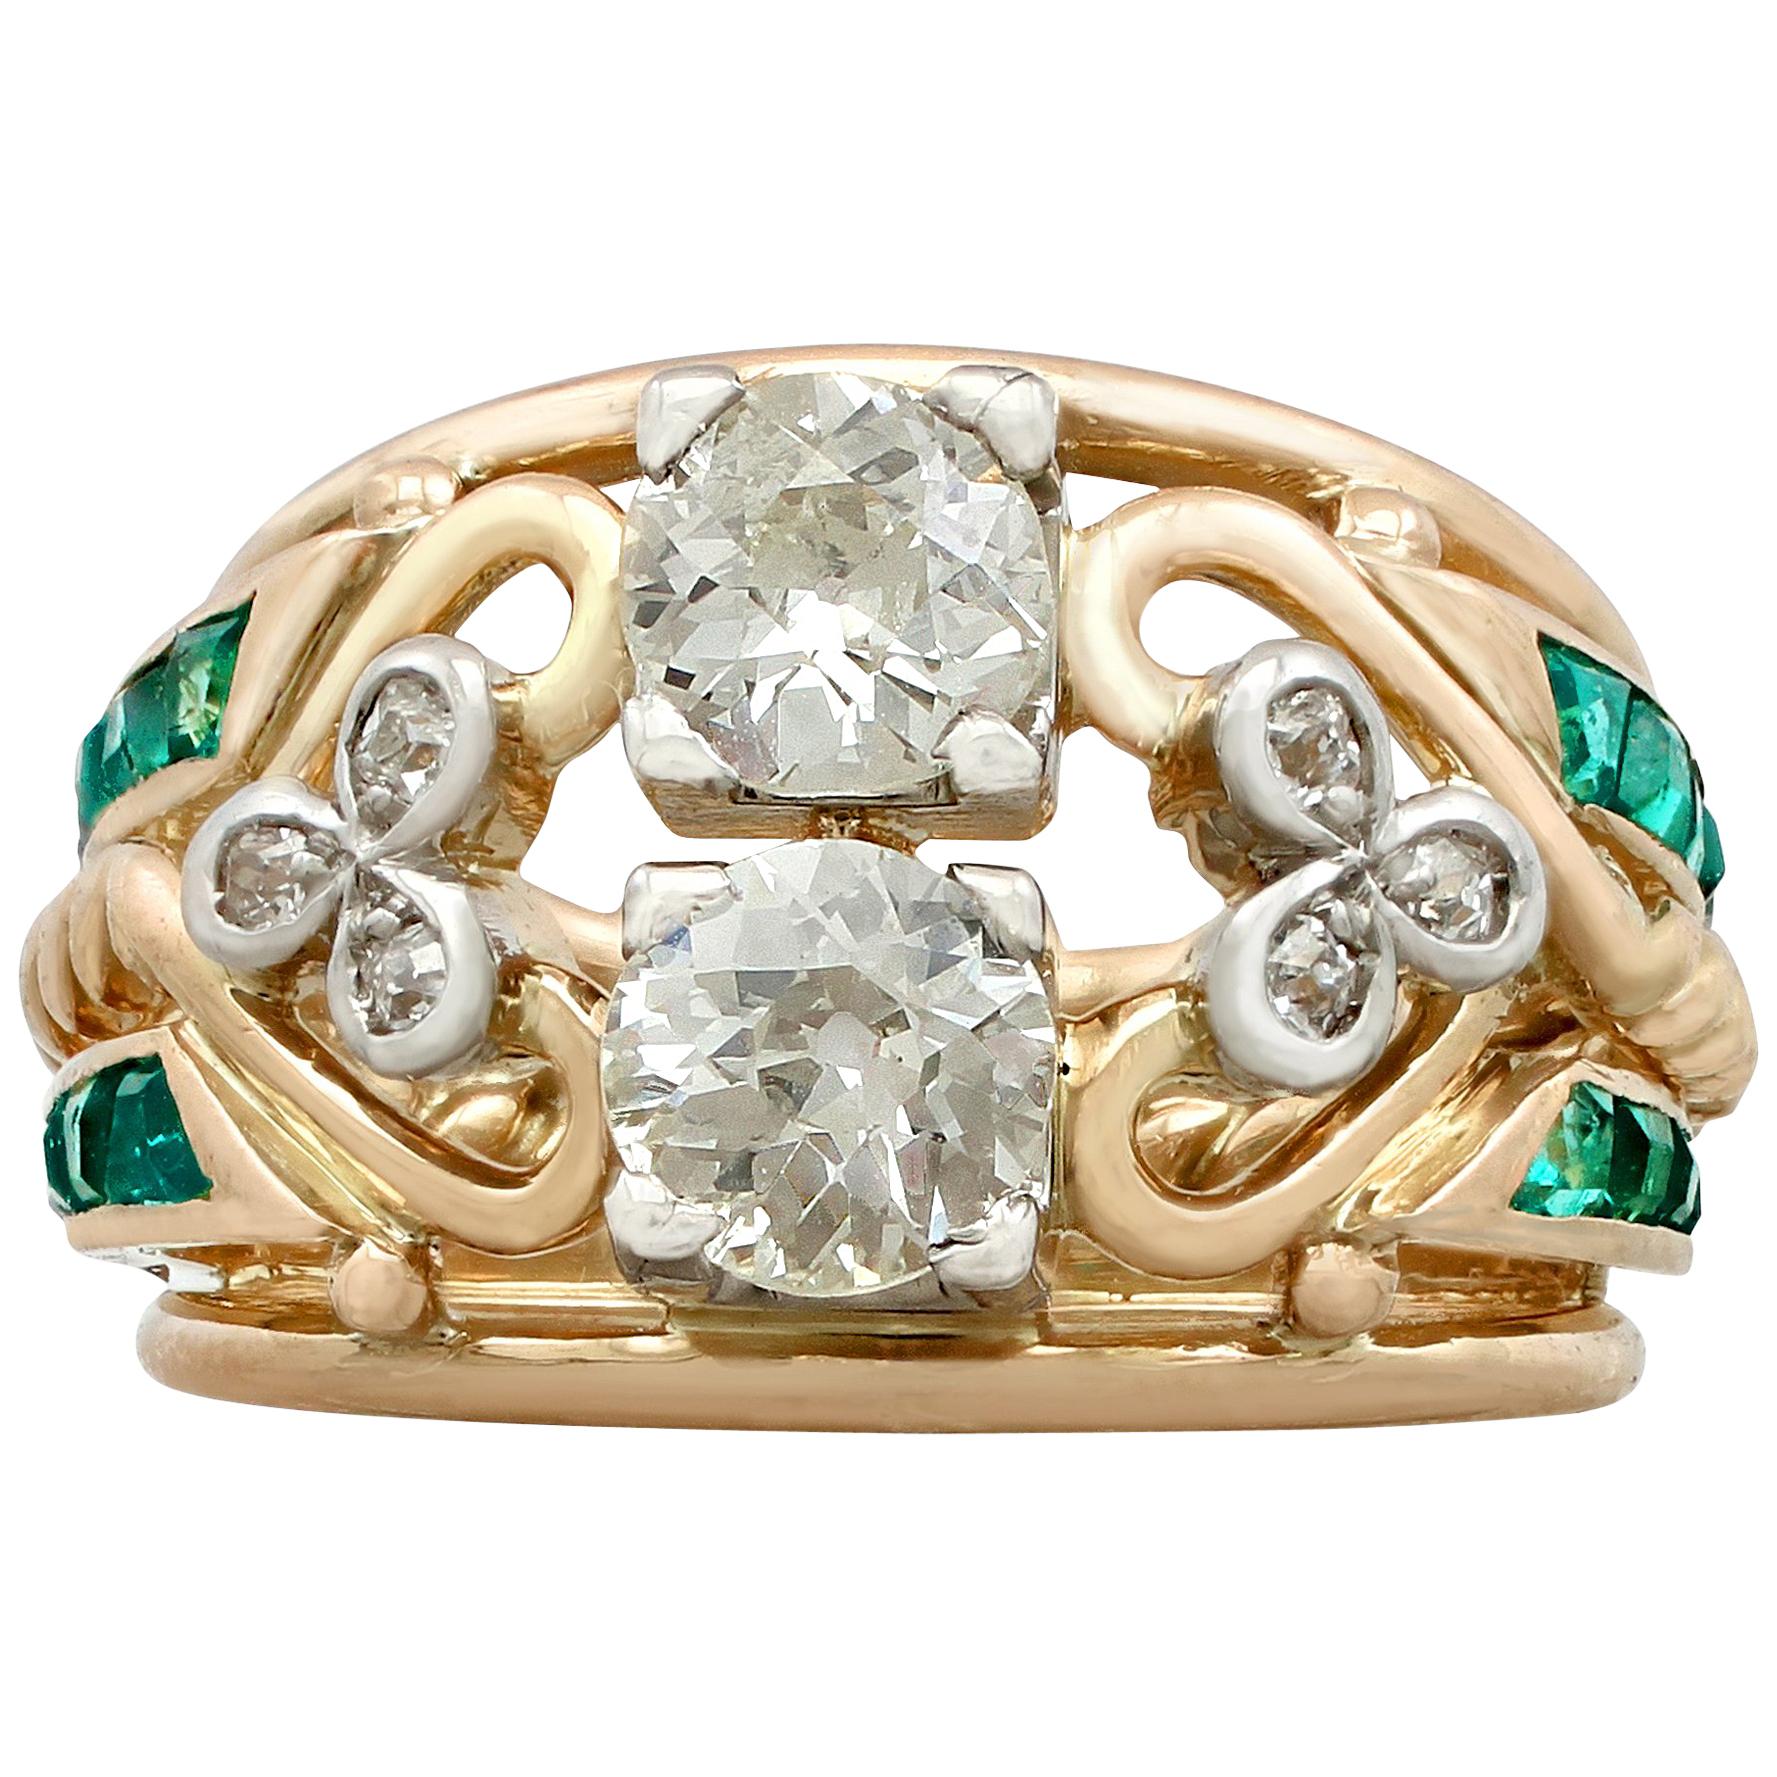 1940s Emerald and 1.26 carat Diamond Yellow Gold Cocktail Ring Size J1/2 US 5